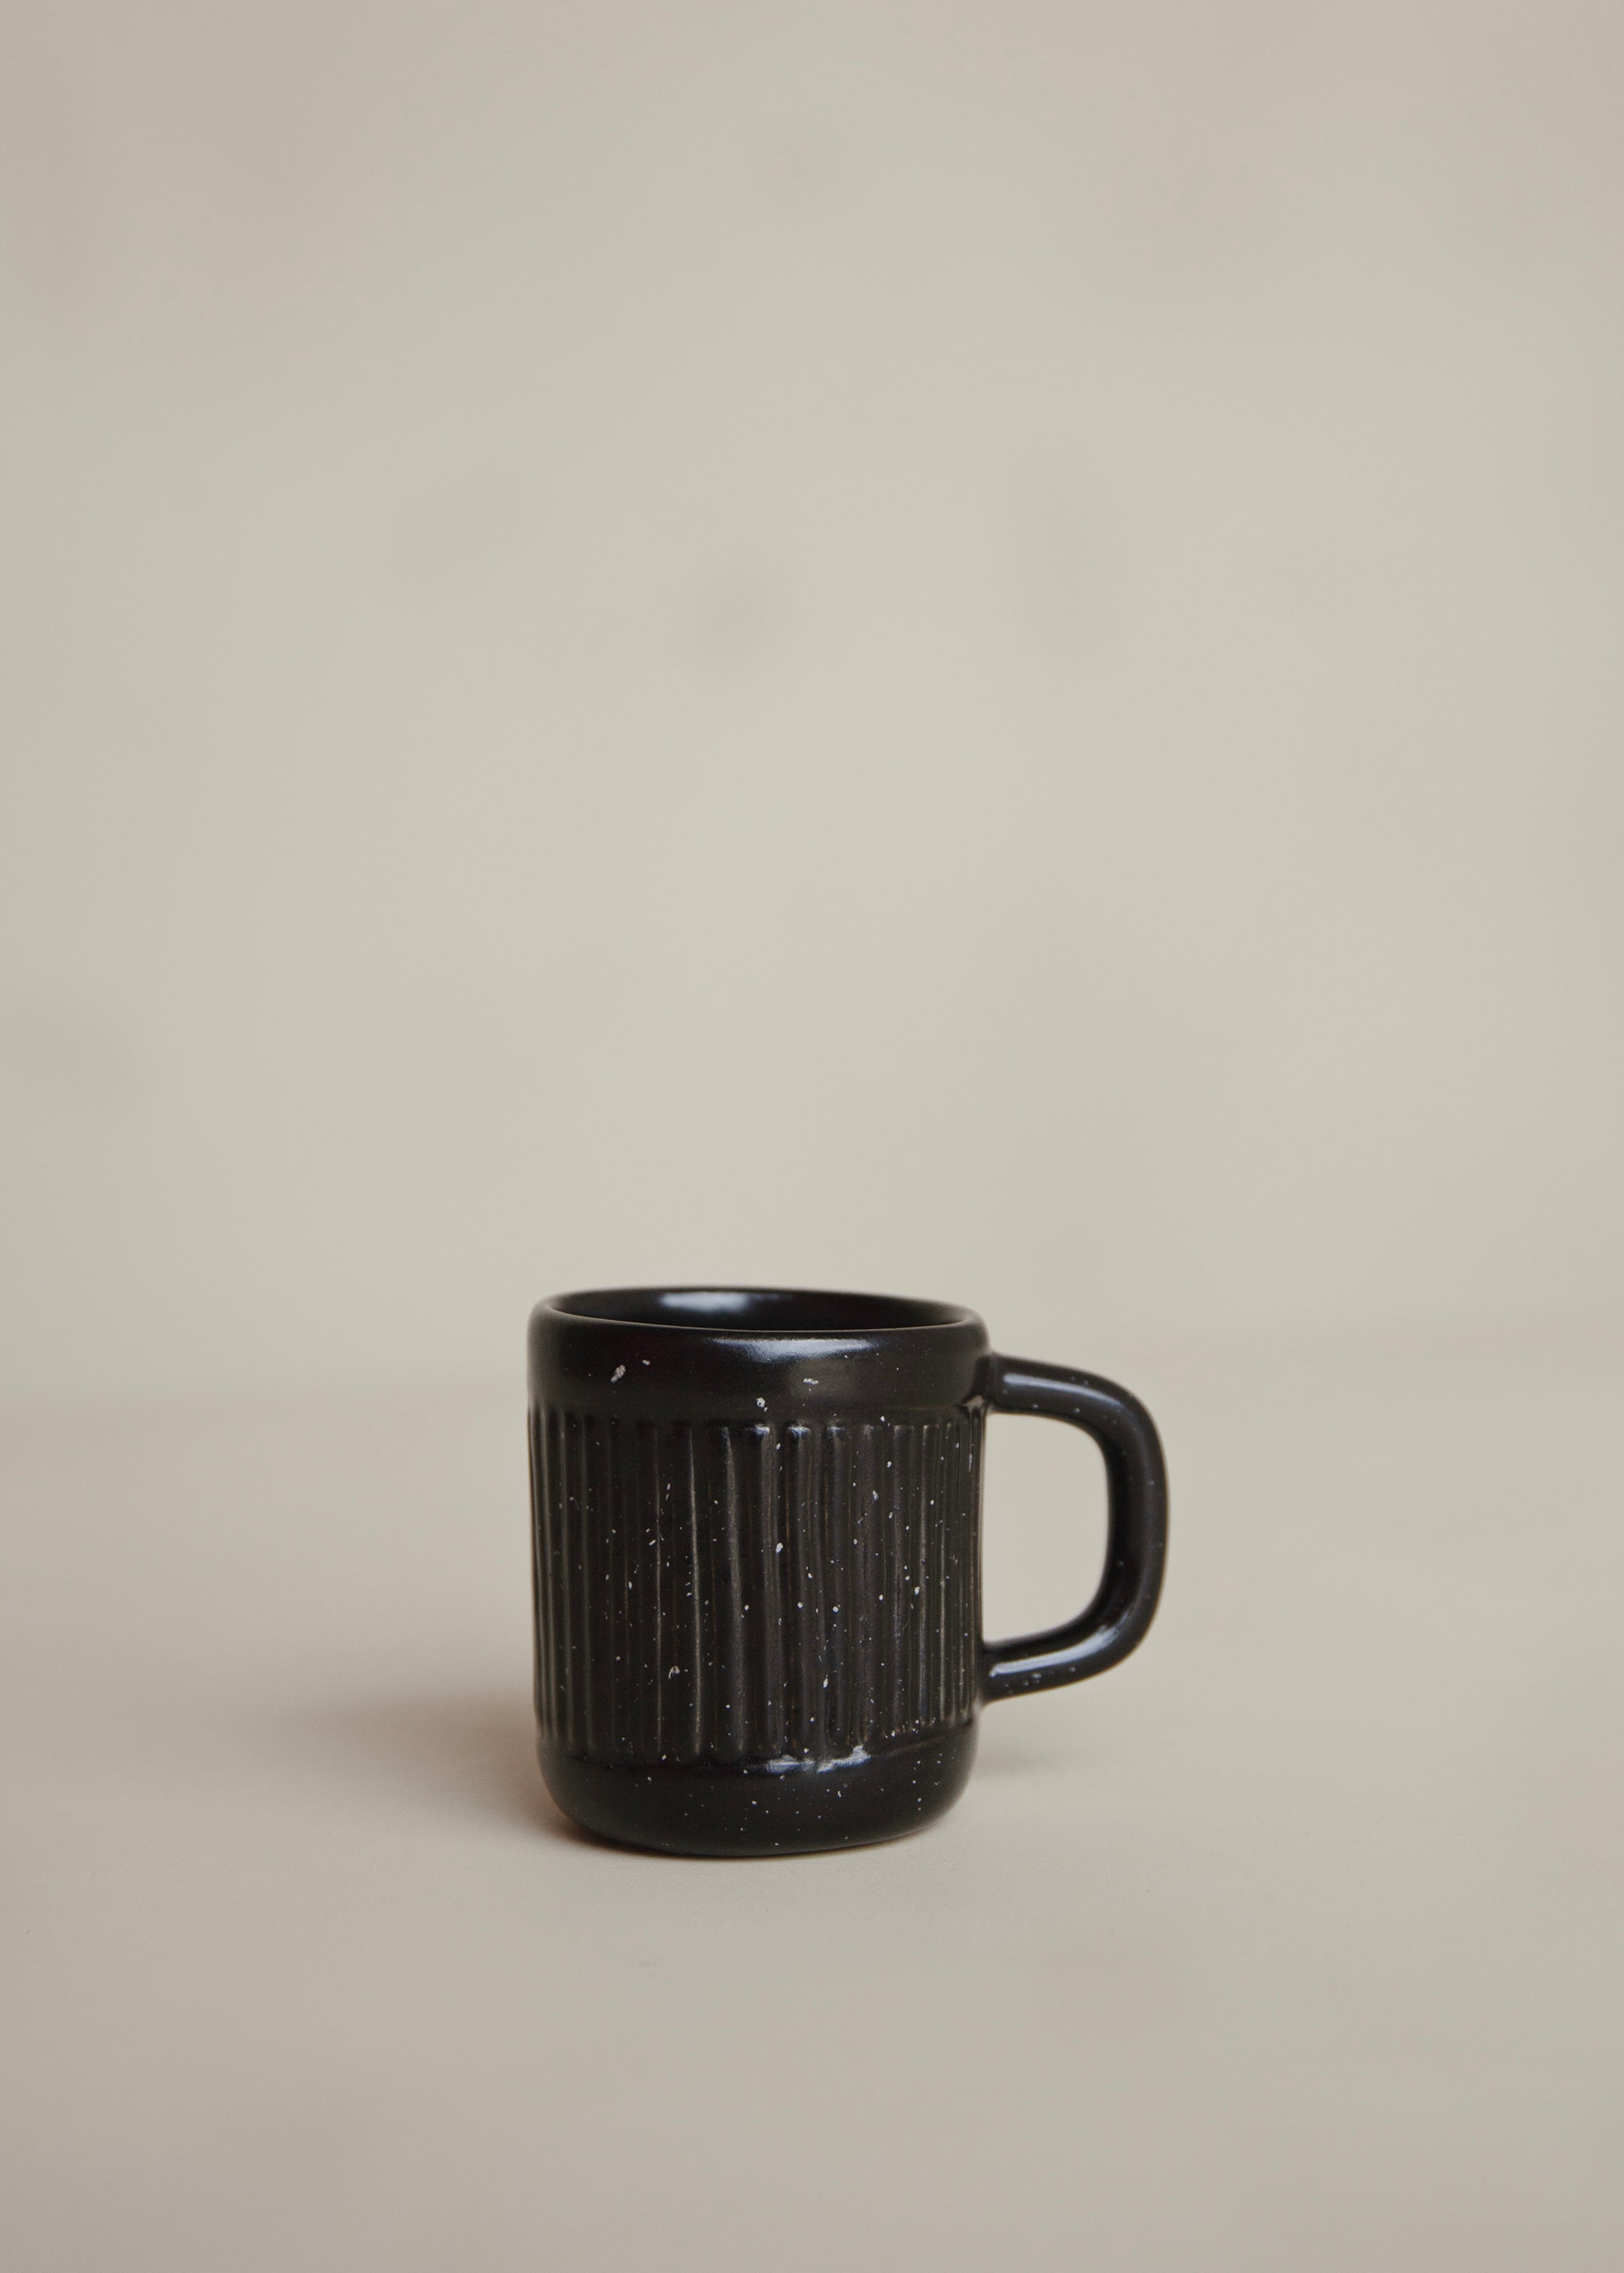 Wono Cup / Speckled Black